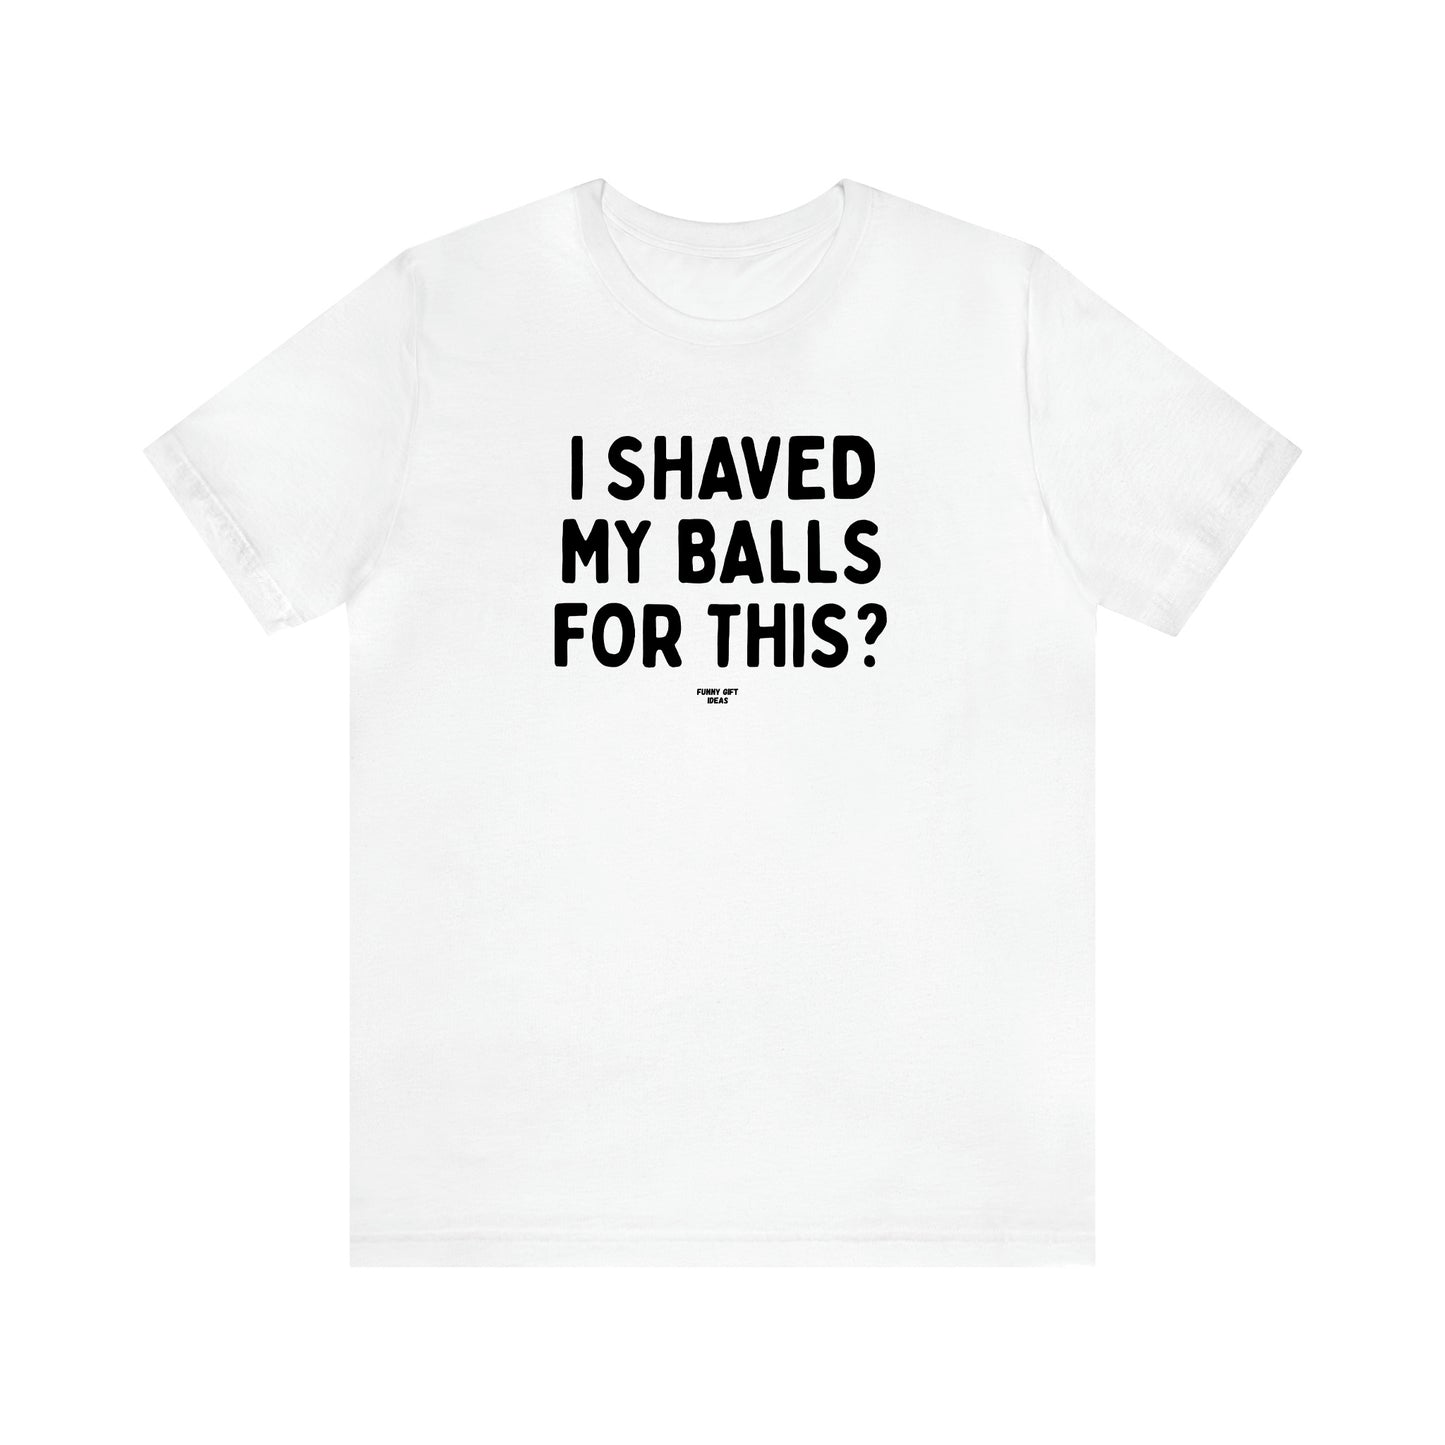 Men's T Shirts I Shaved My Balls for This? - Funny Gift Ideas